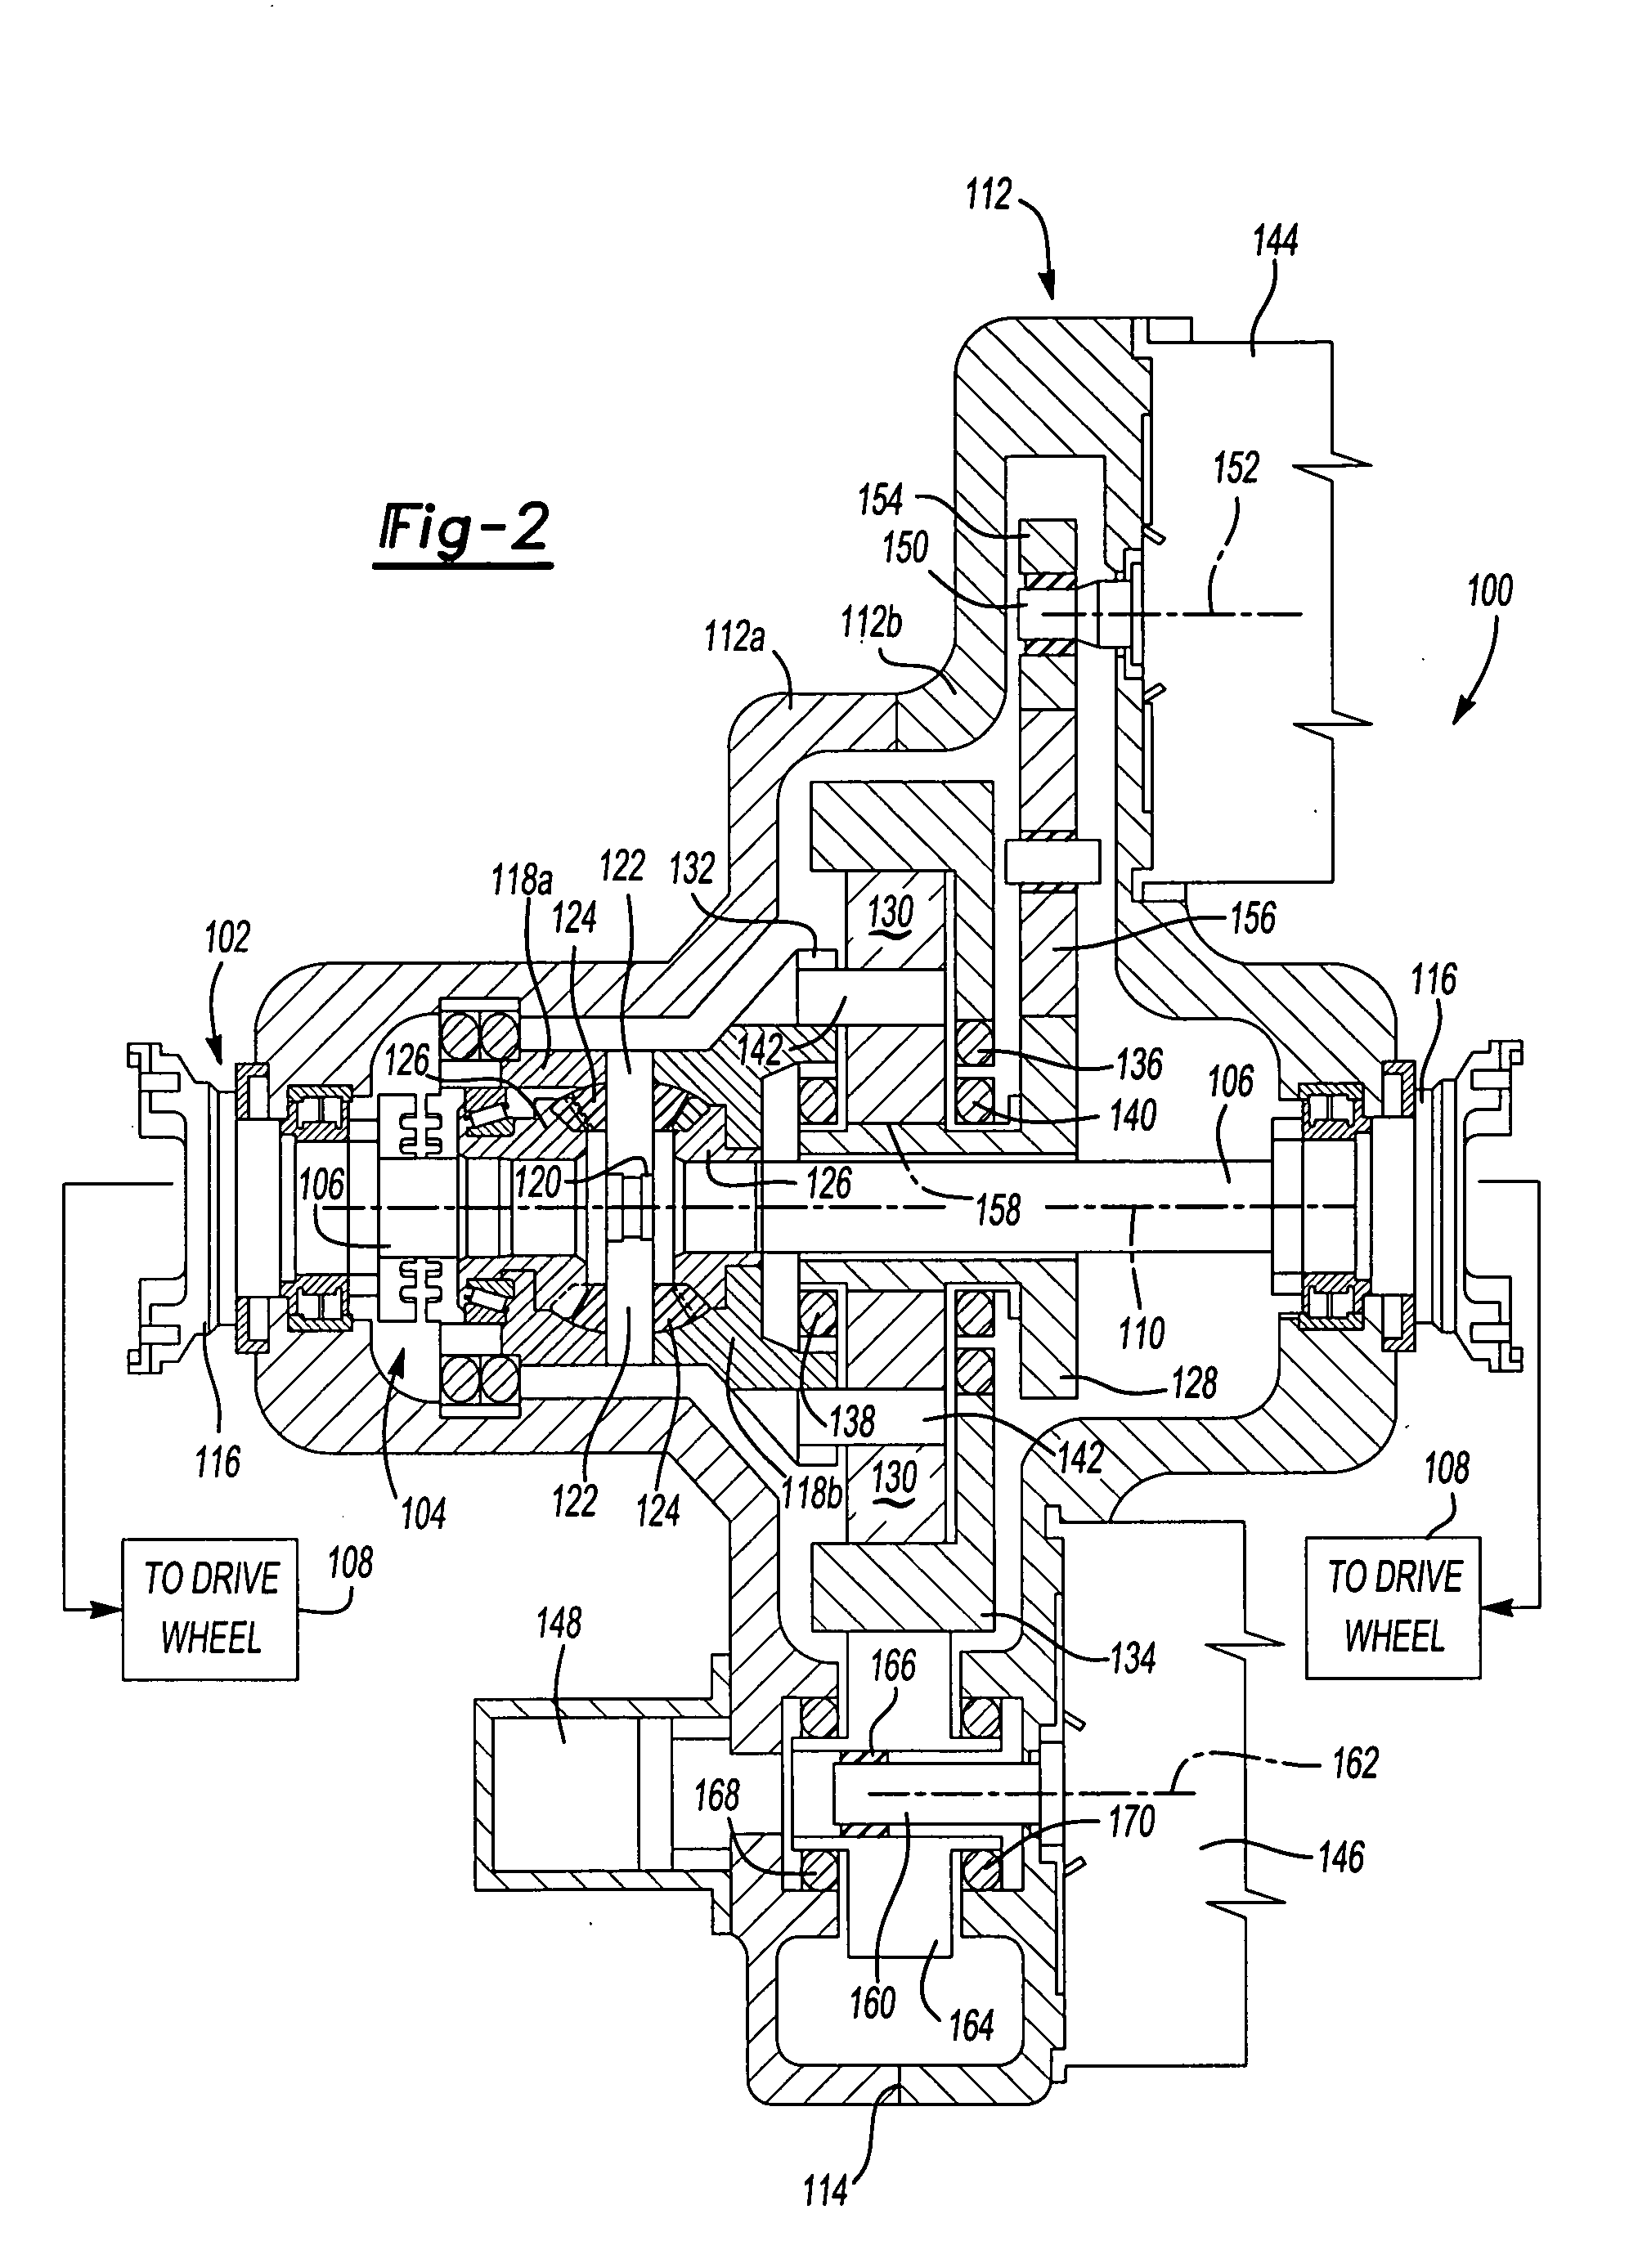 Variable ratio drive system